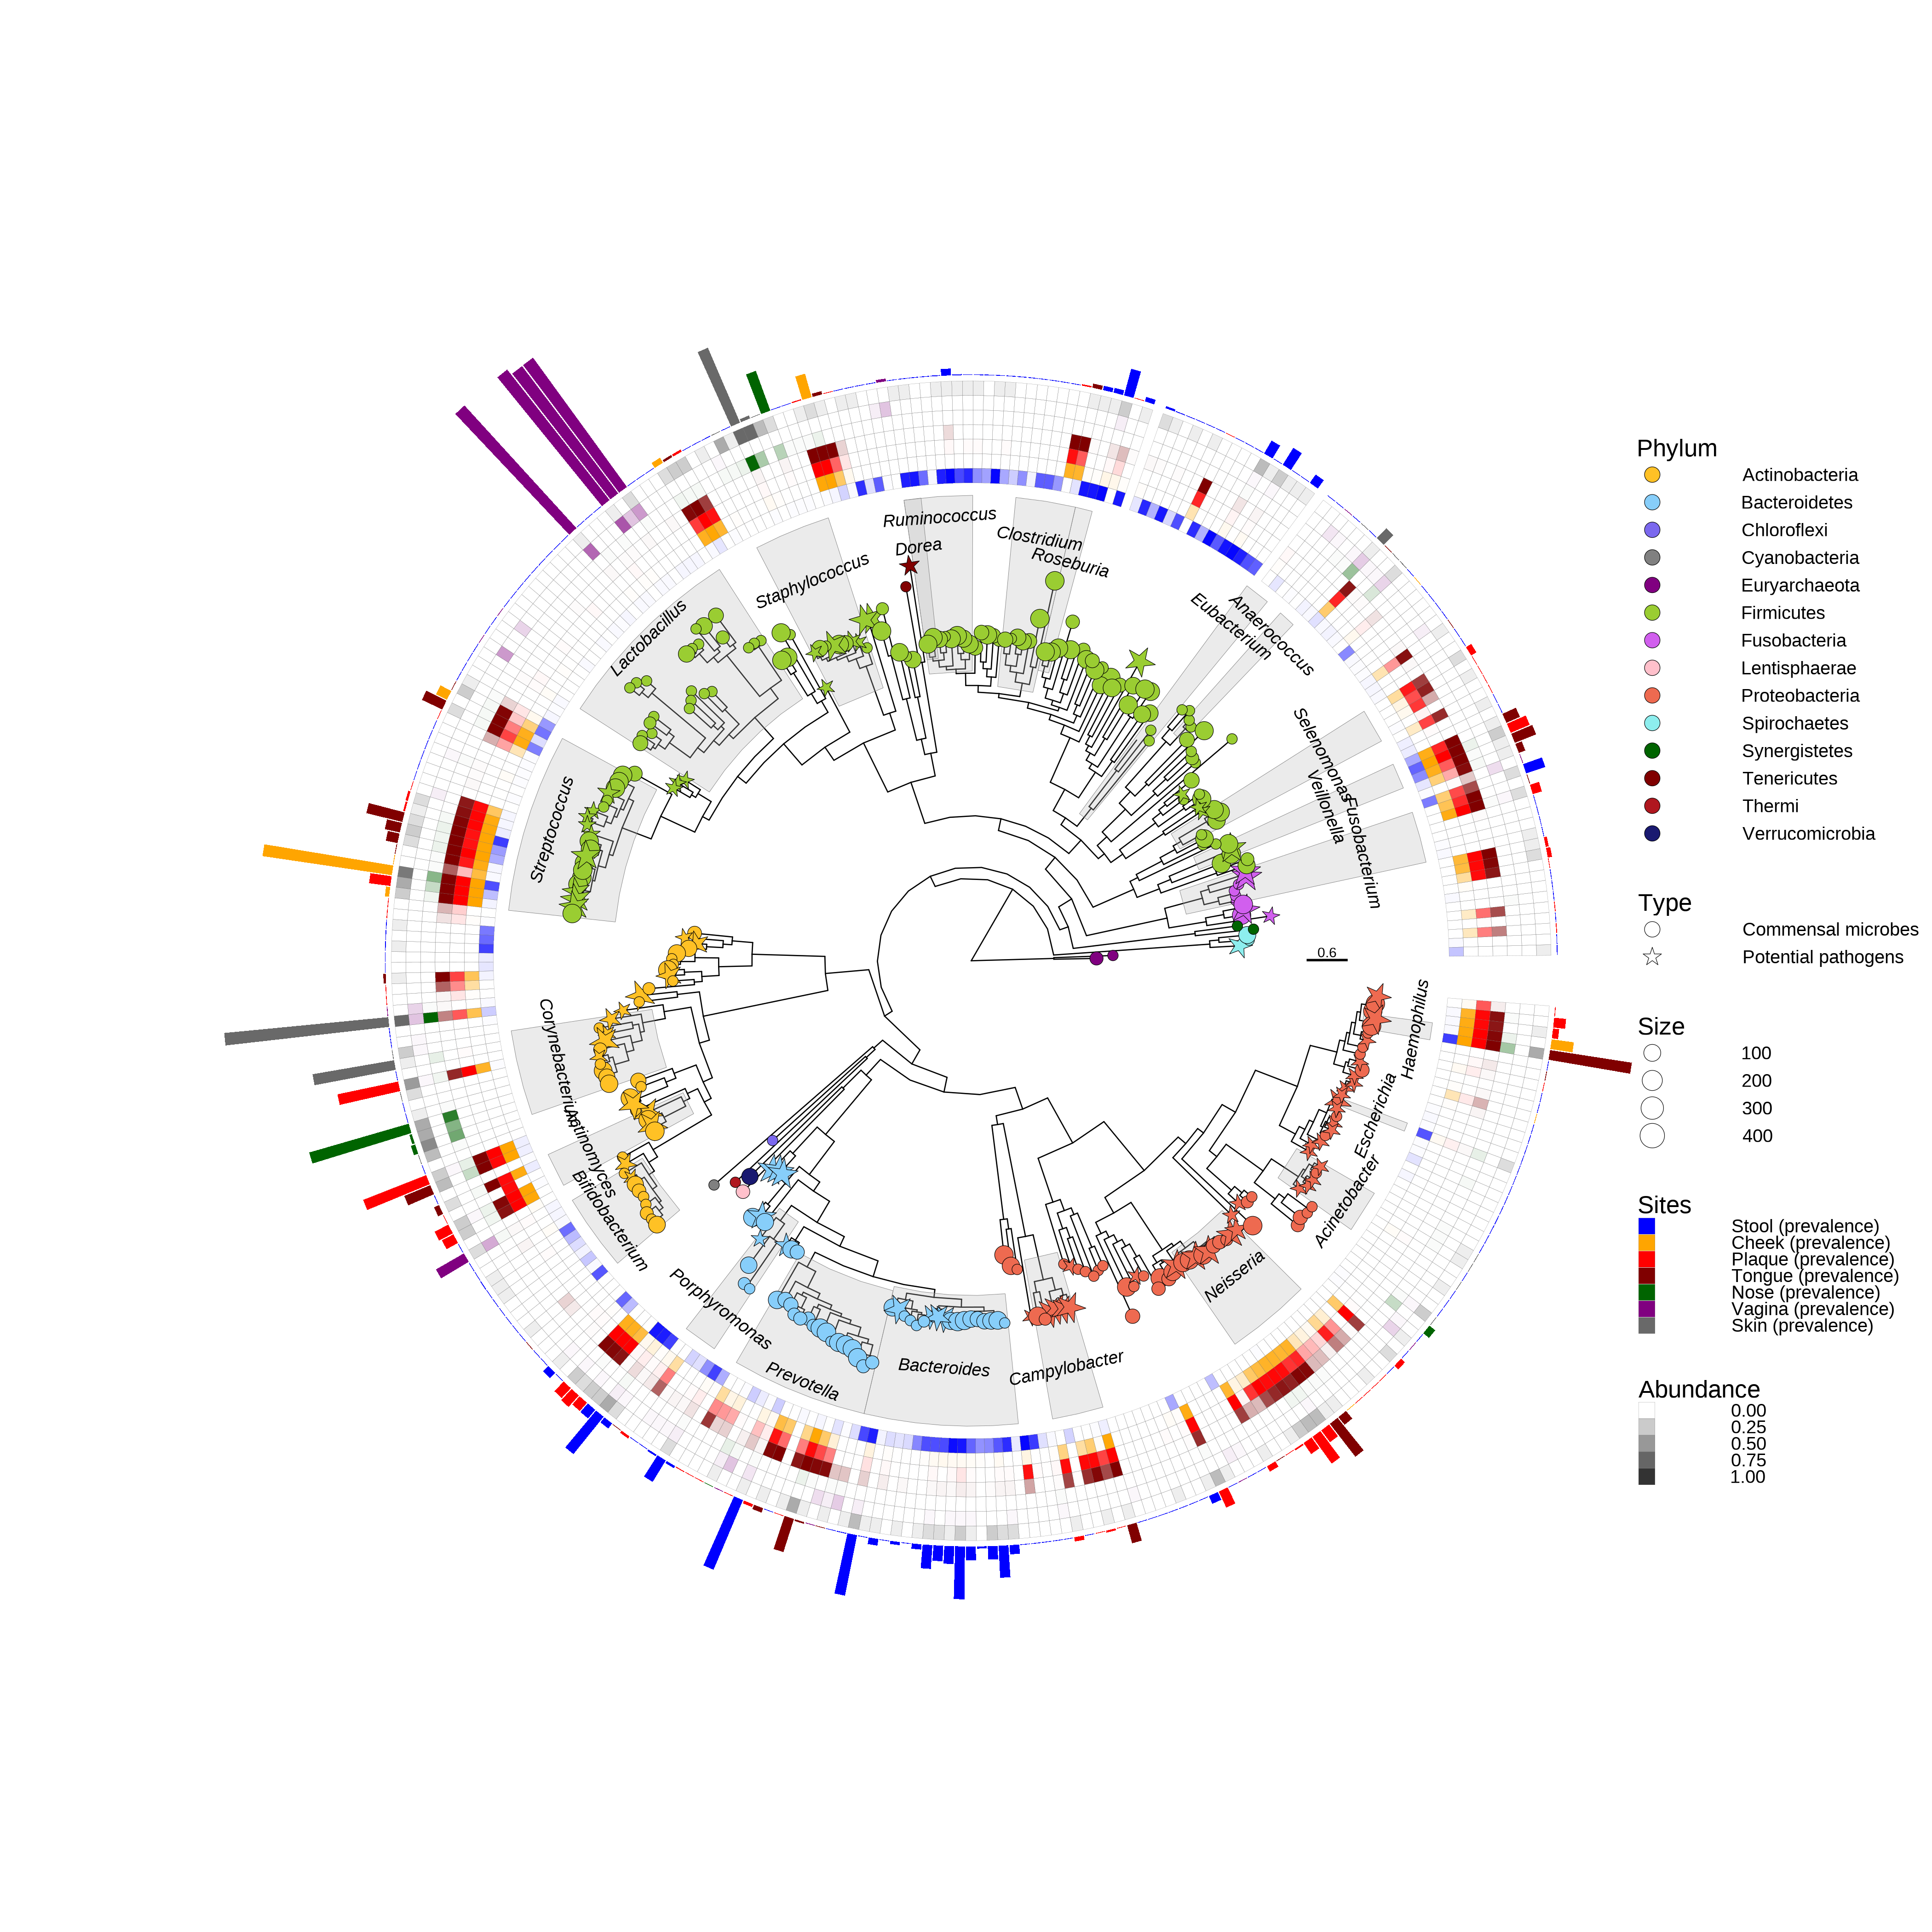 Phylogenetic tree about the abundance of microbes at different sites of human.